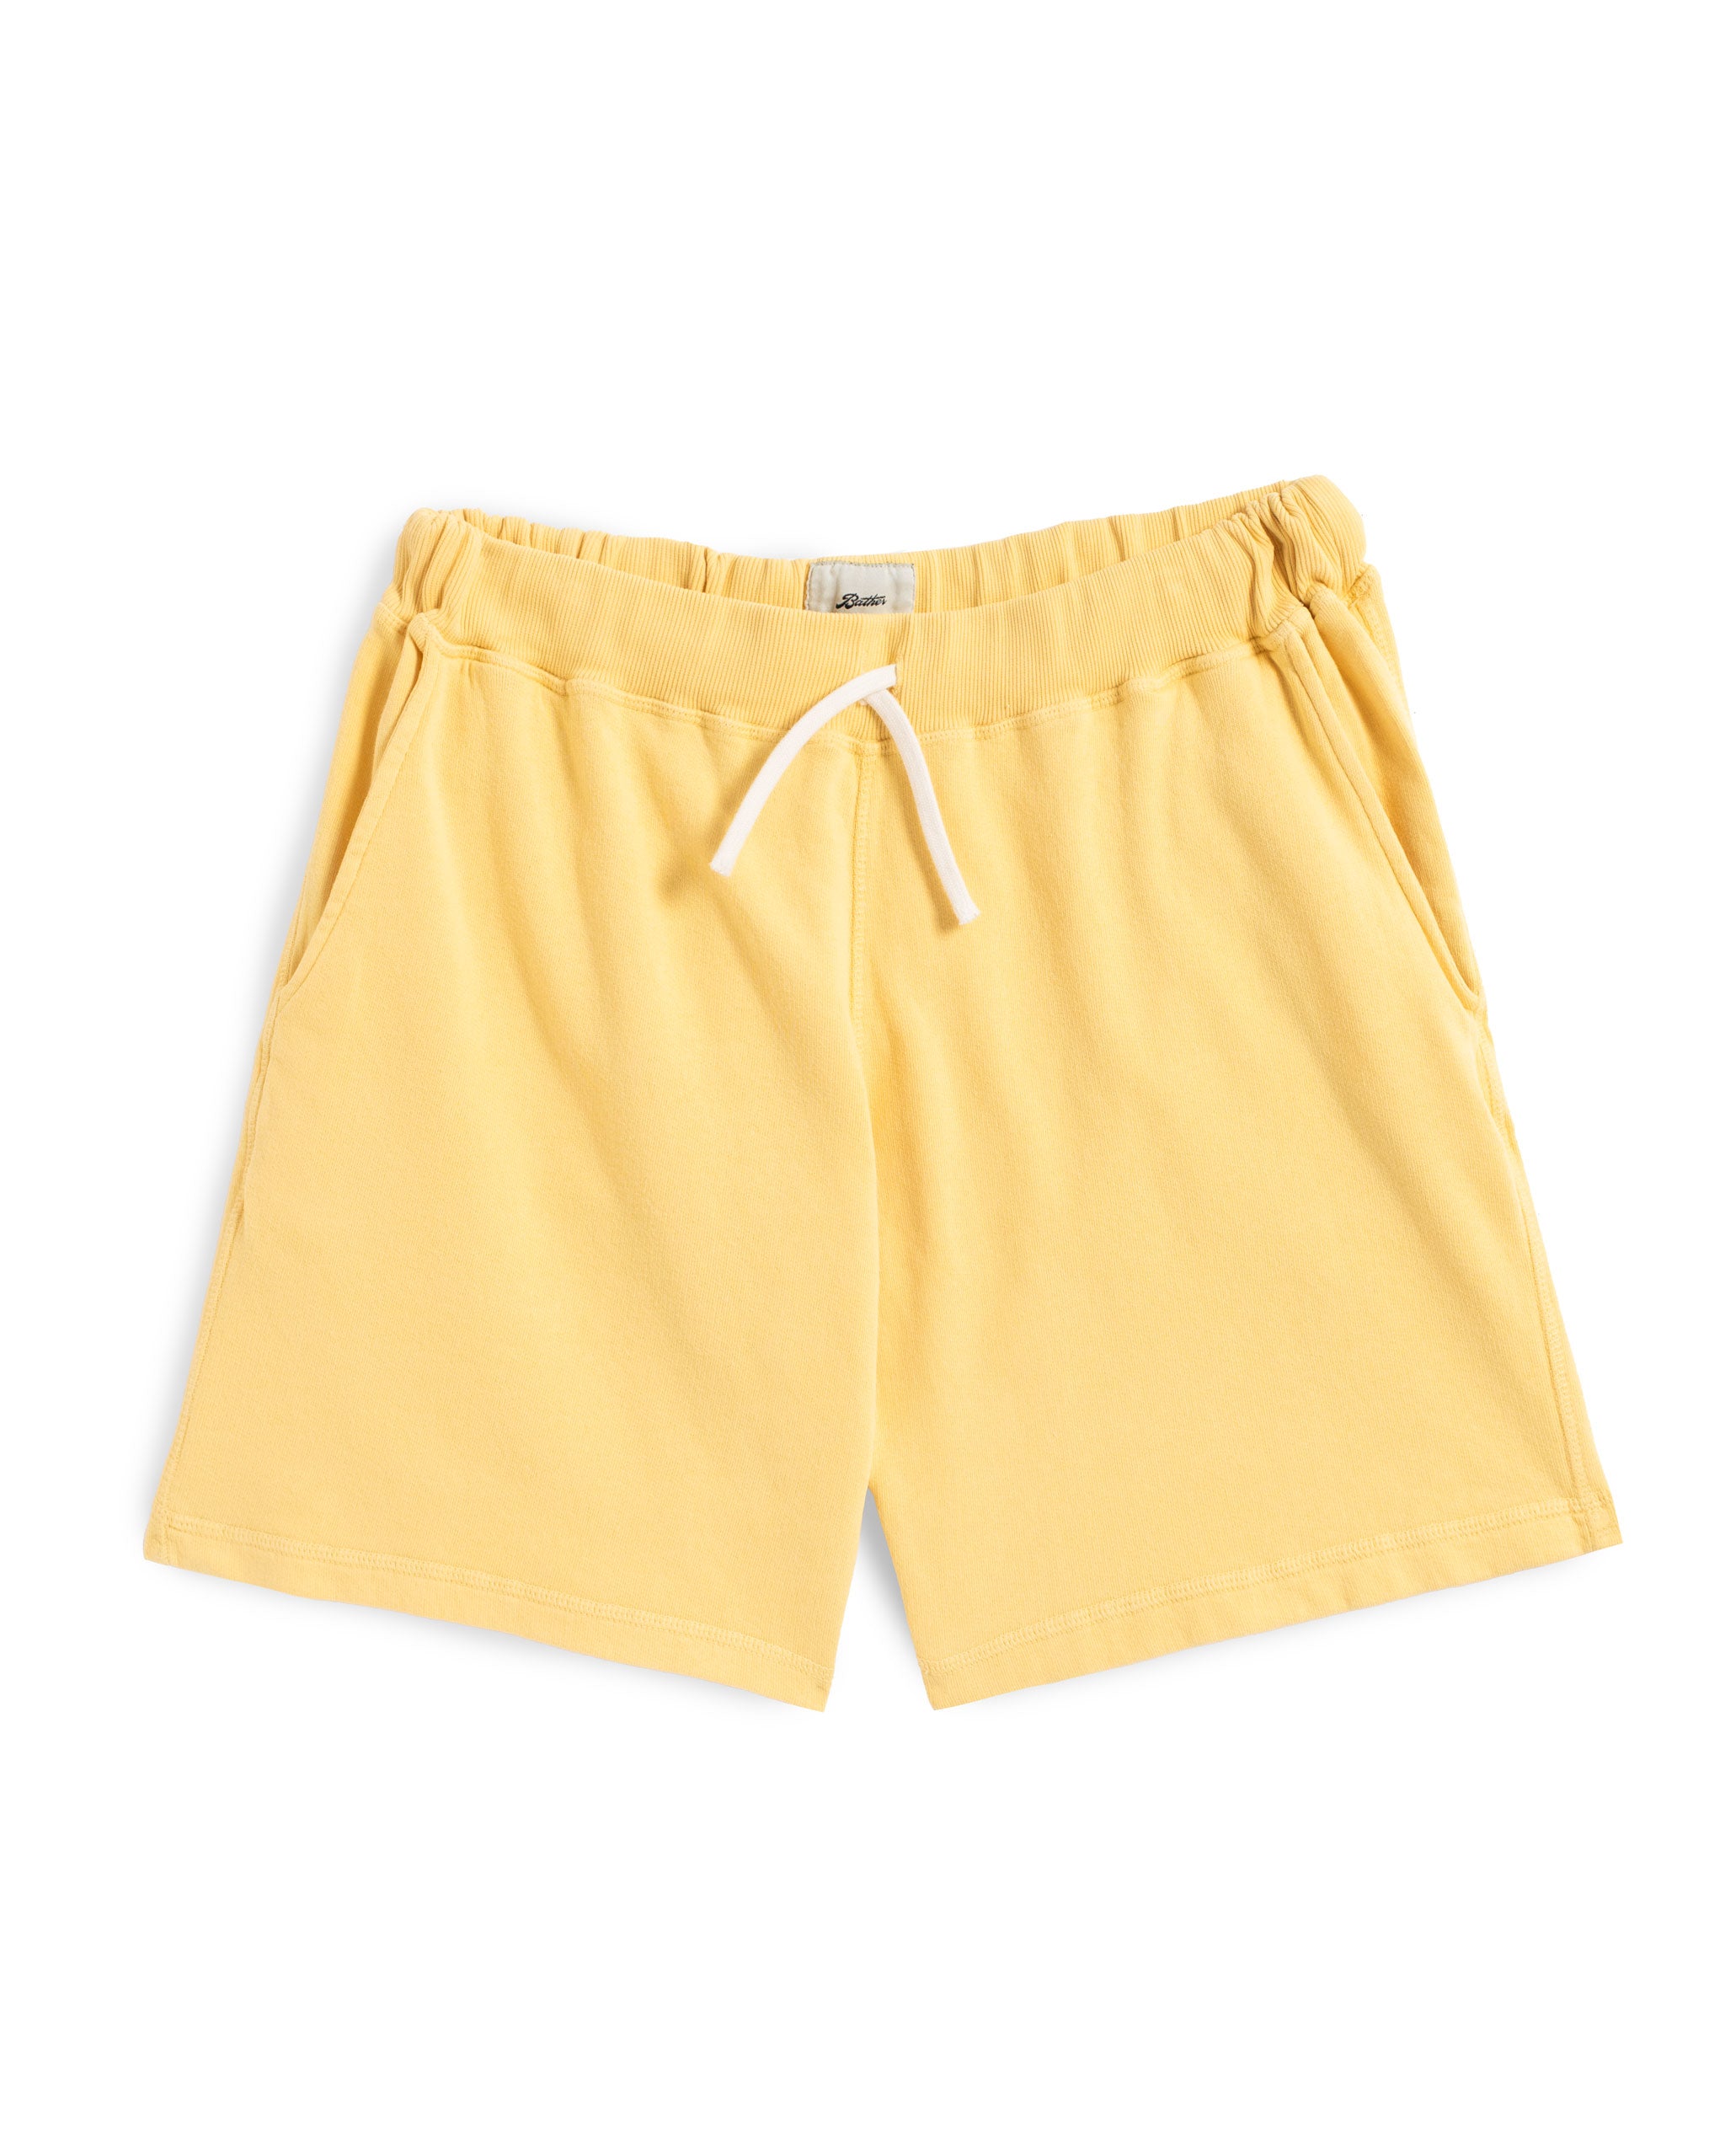 Solid Canary Yellow French Terry Sweat Shorts 